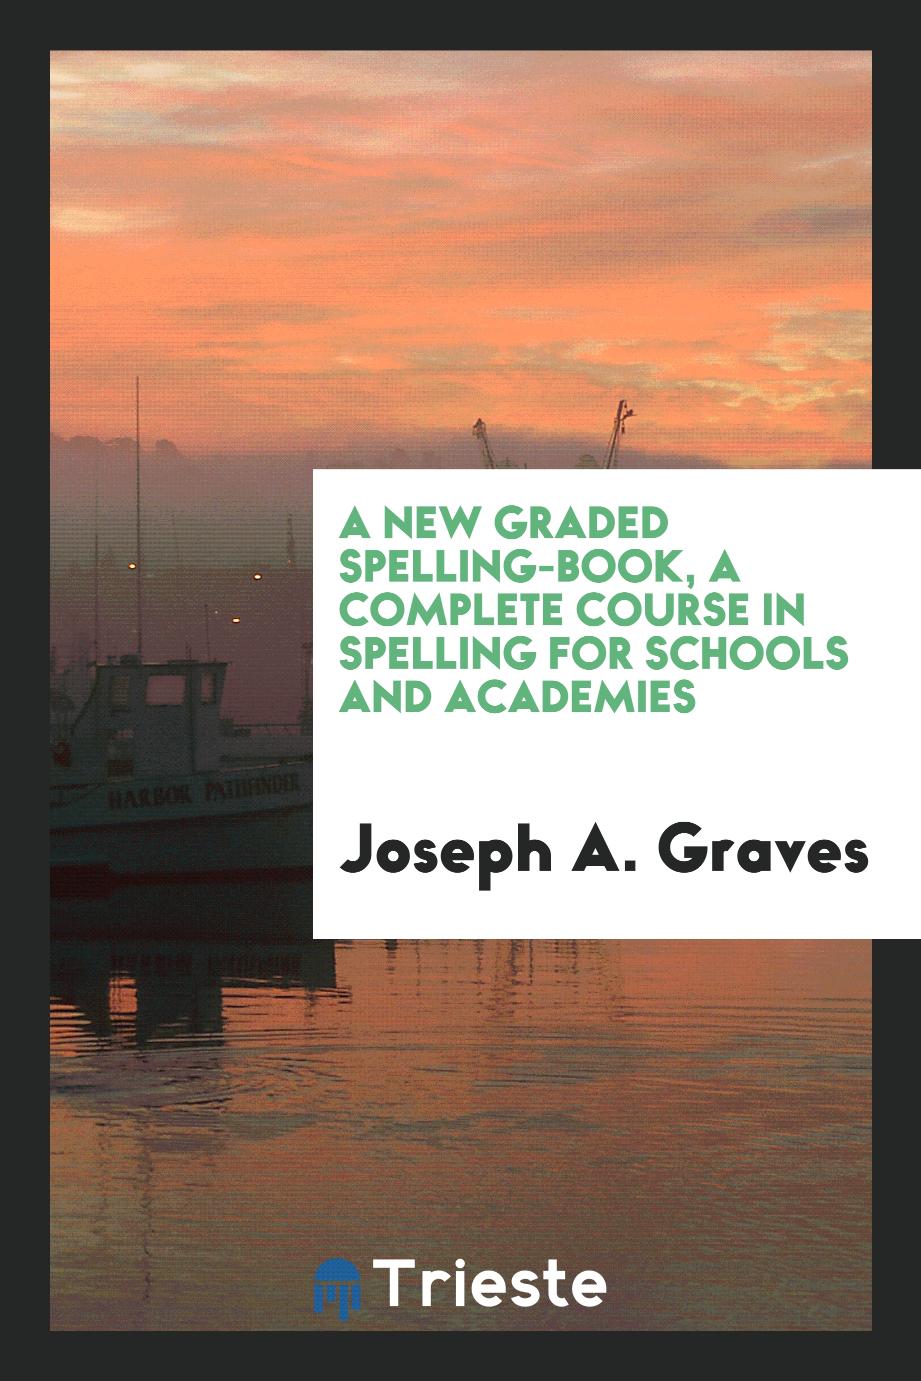 A New Graded Spelling-Book, a Complete Course in Spelling for Schools and Academies